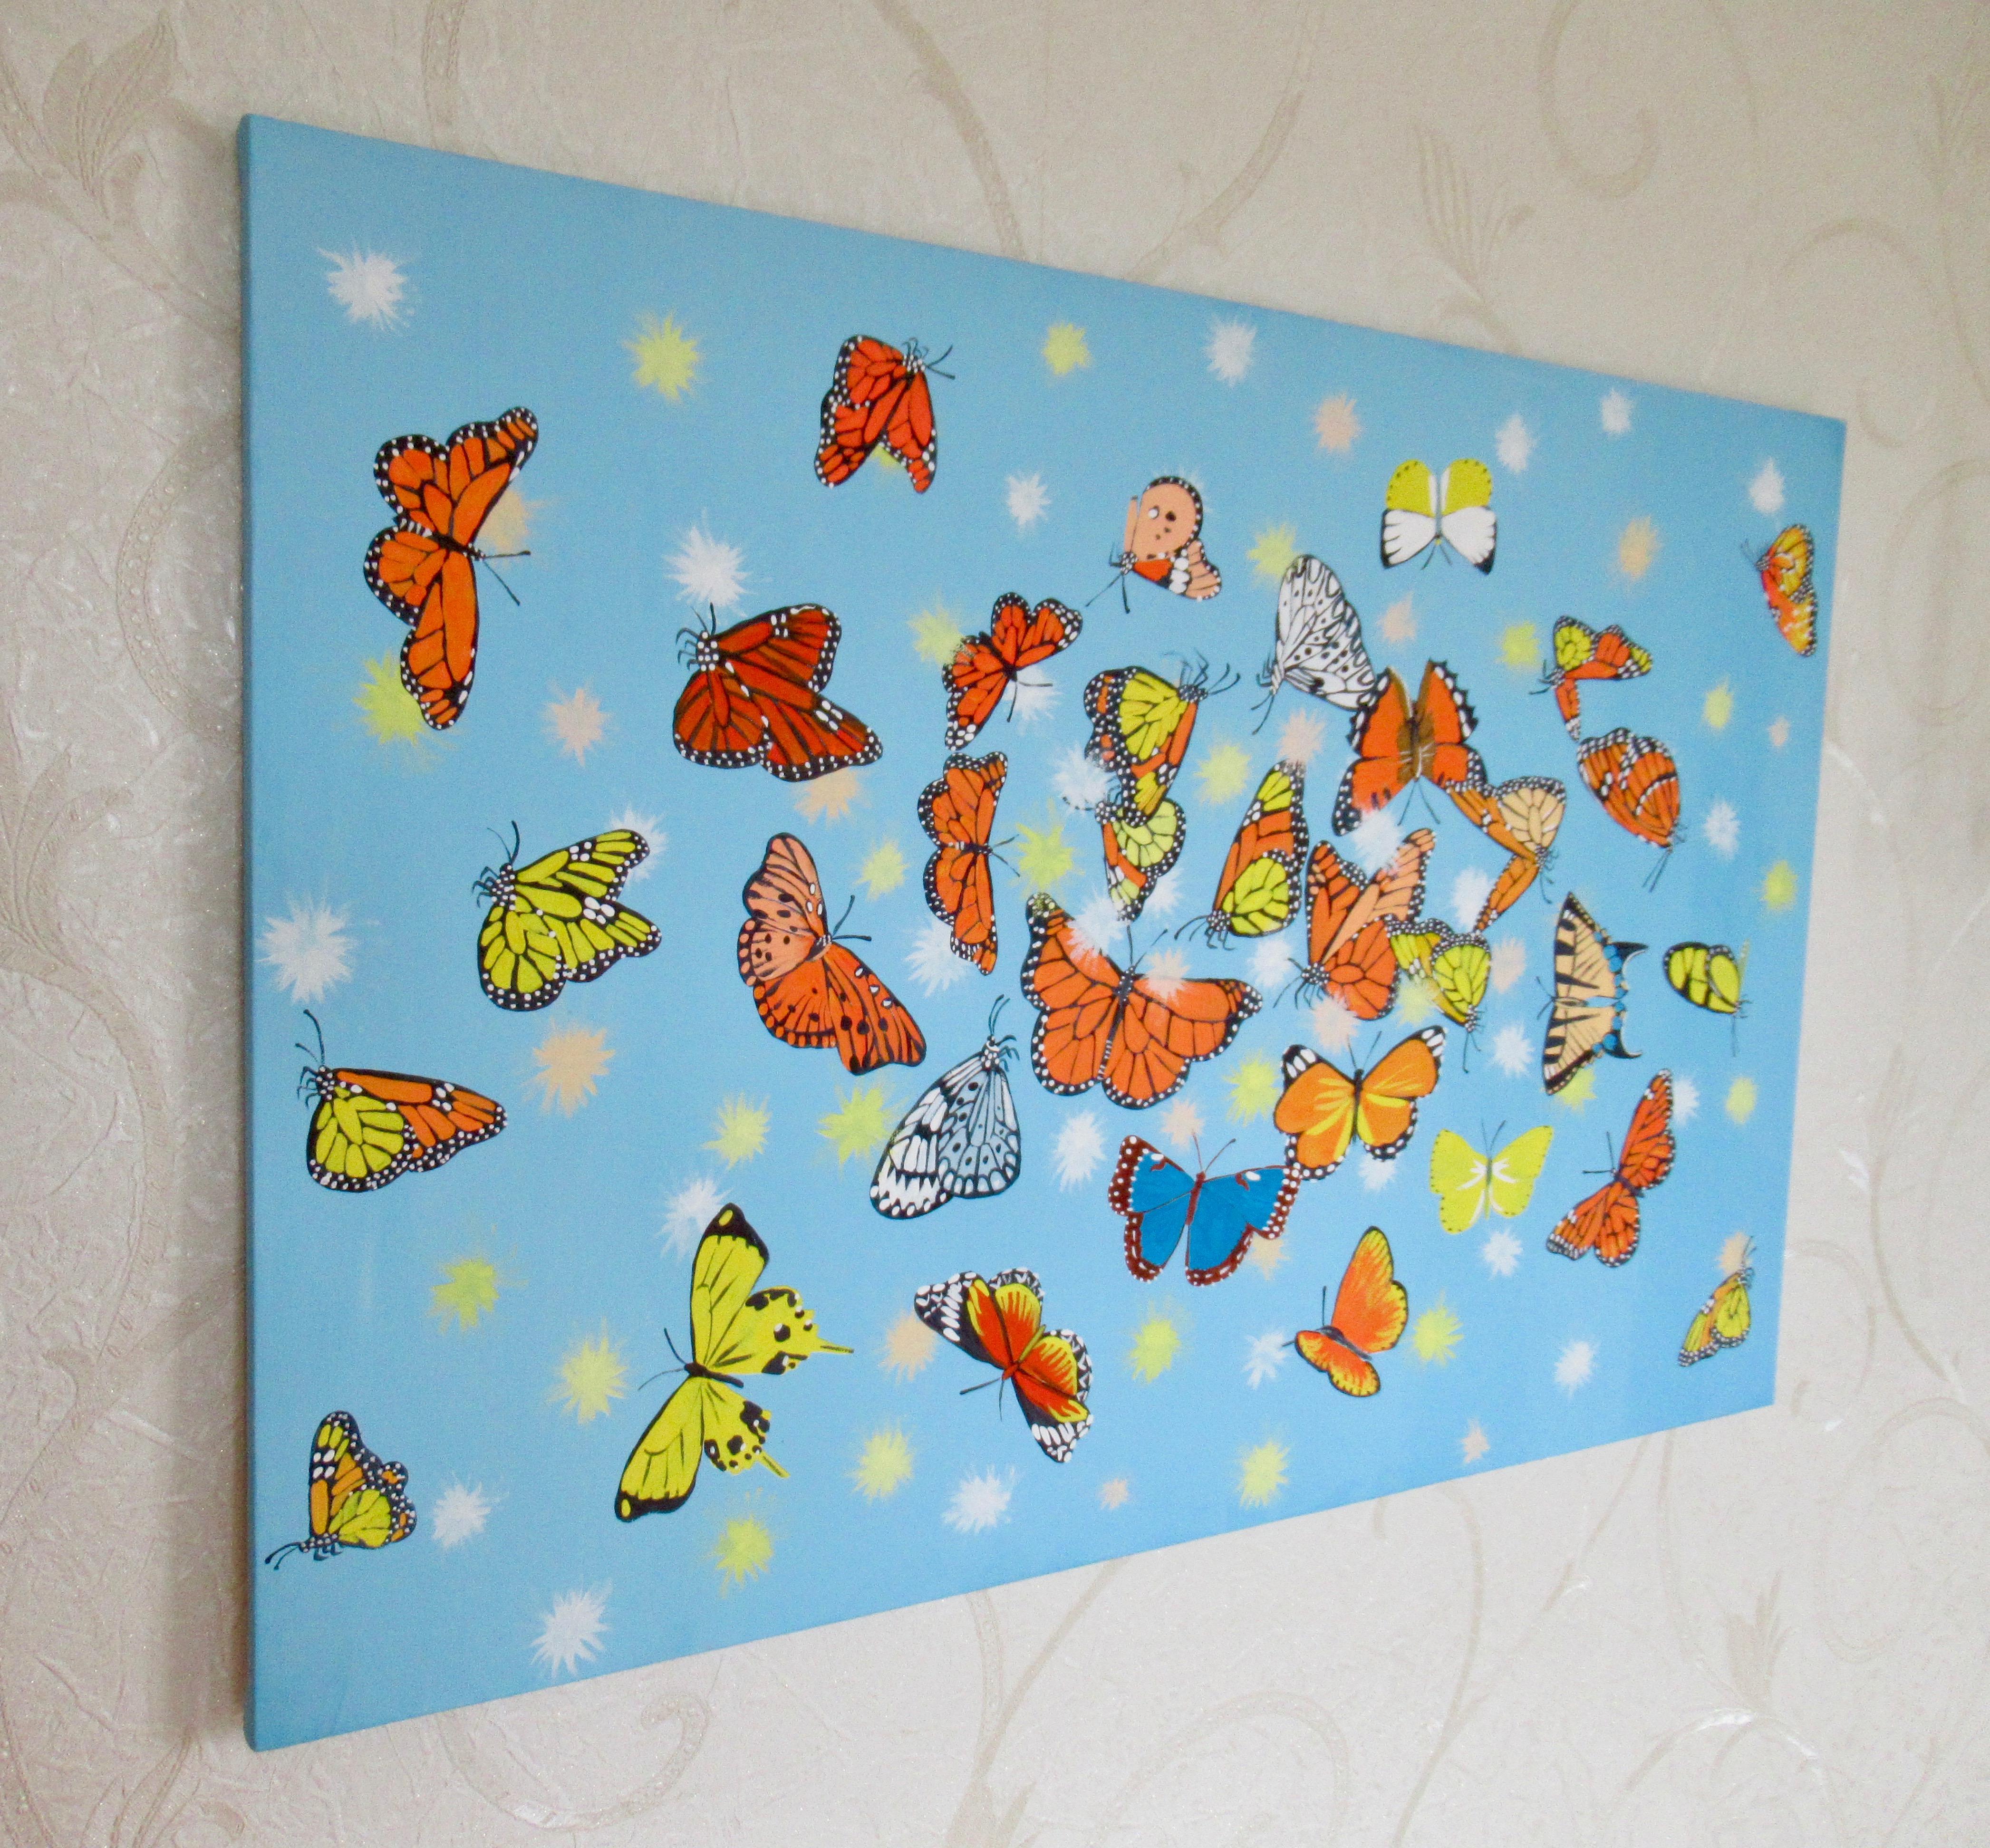 acrylic paintings of butterflies